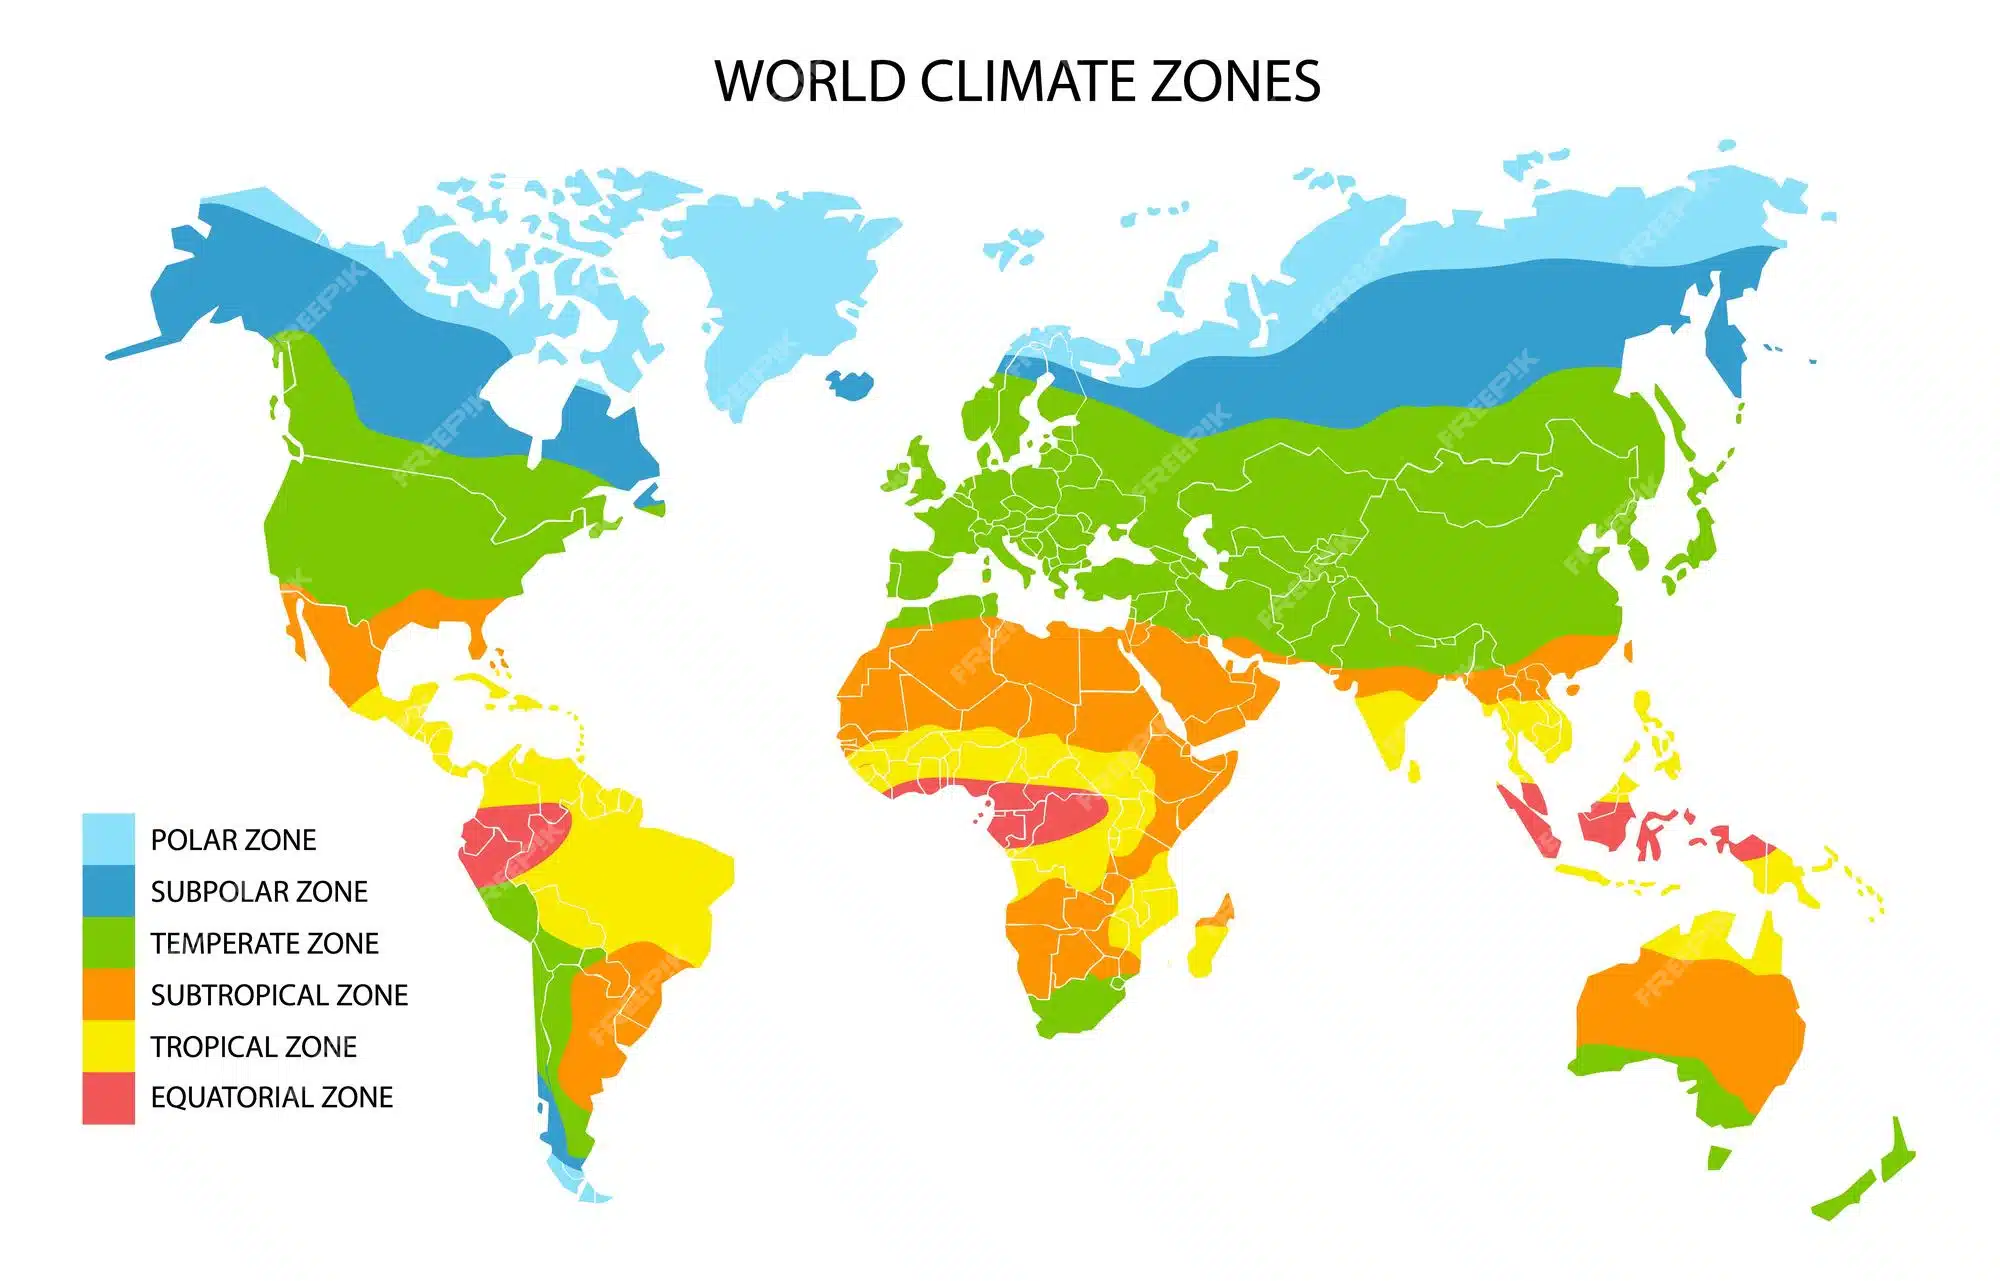 Map displaying world climate zones, color-coded to identify different regions